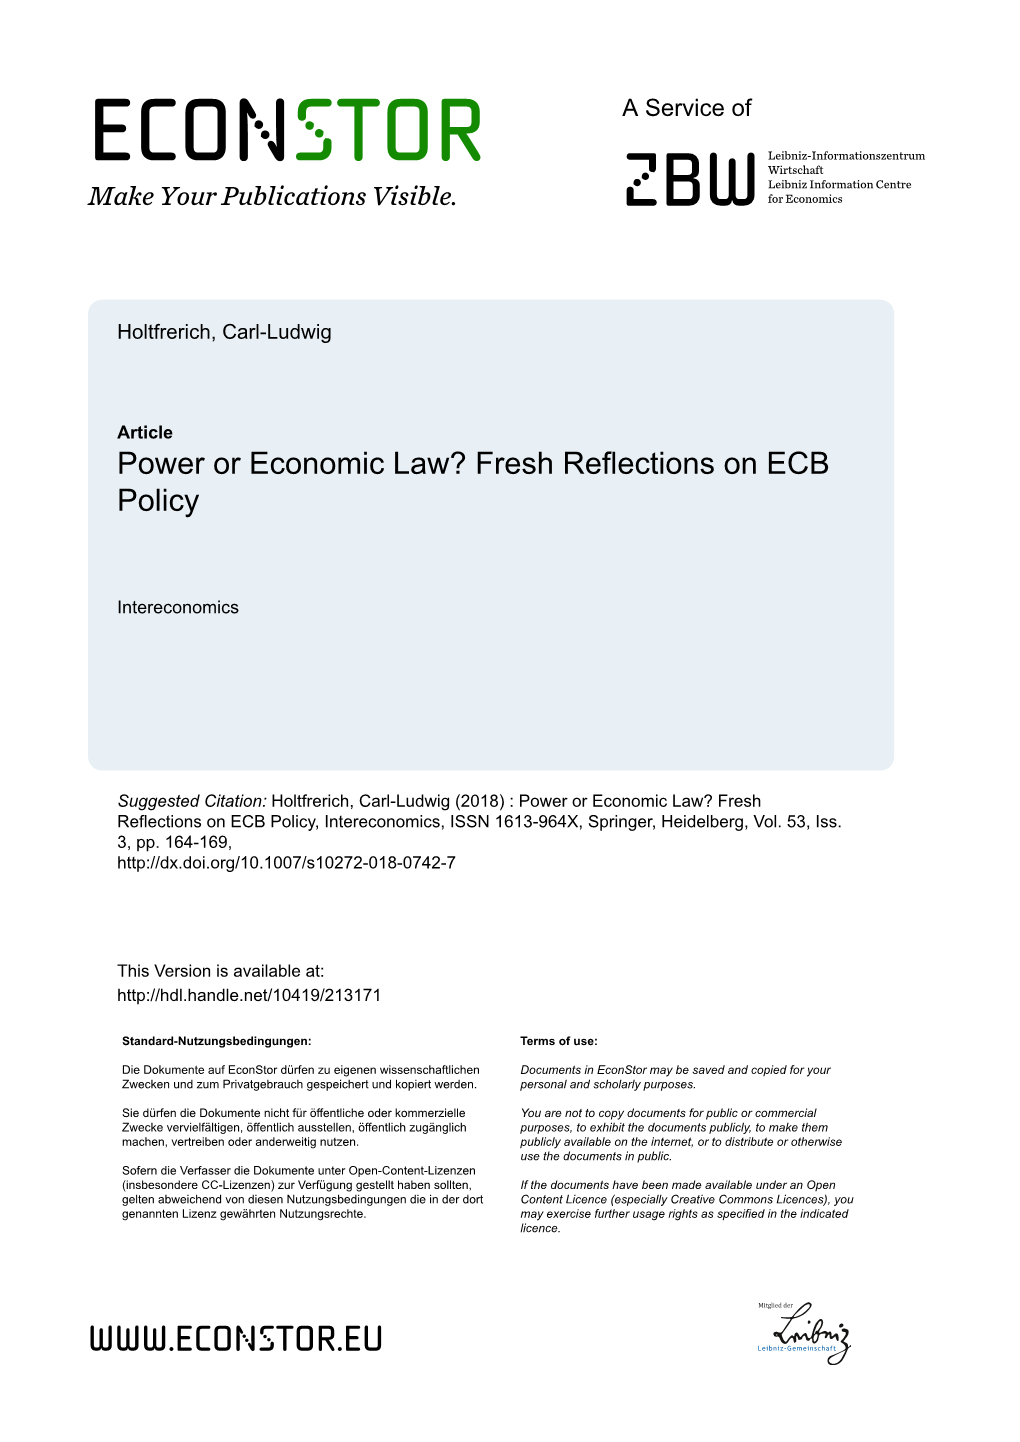 Power Or Economic Law? Fresh Reflections on ECB Policy